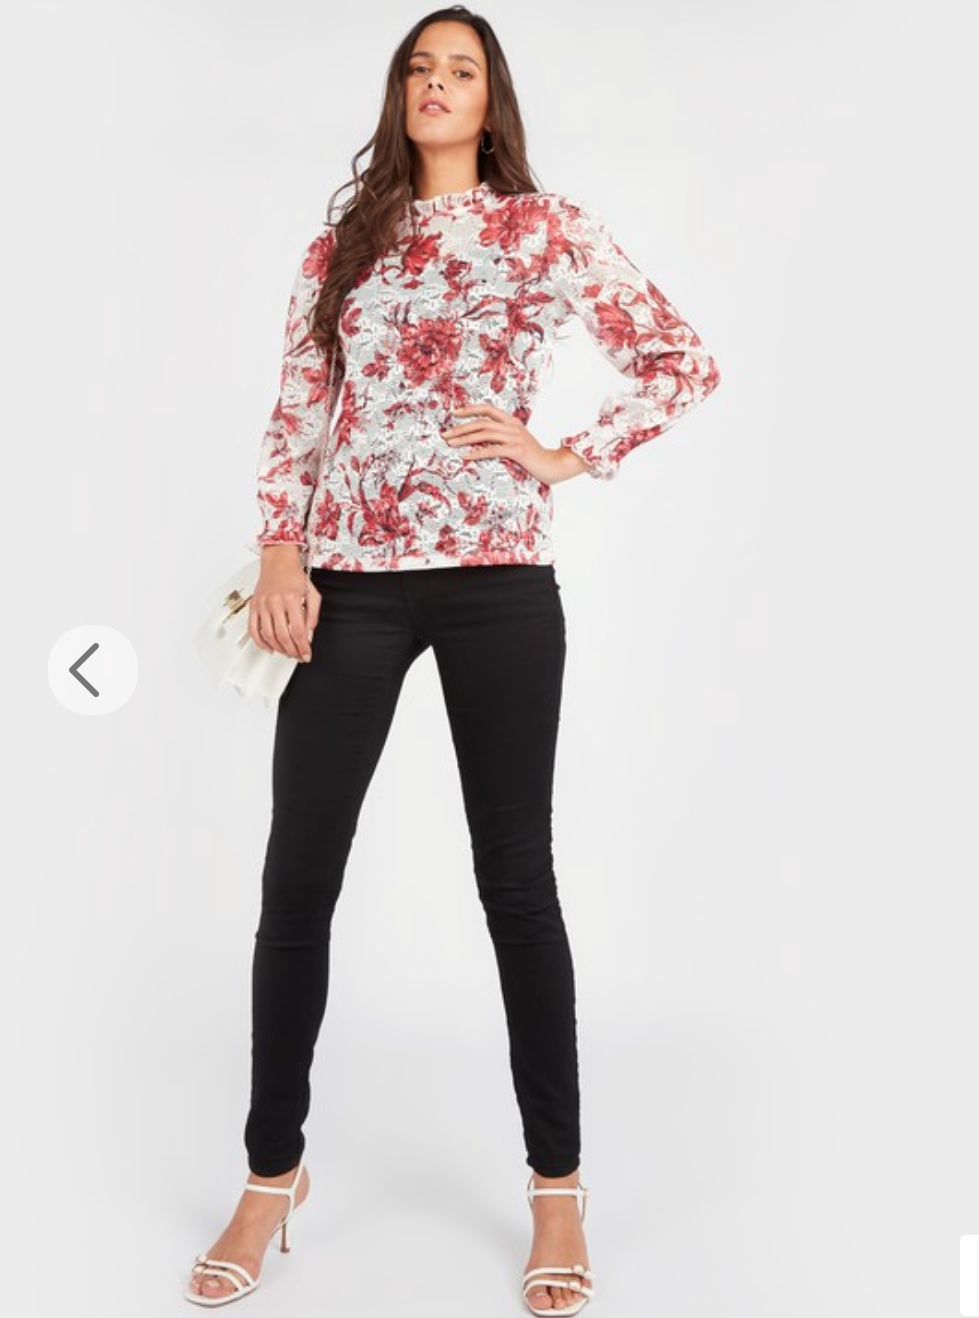 Floral Print Lace Top with